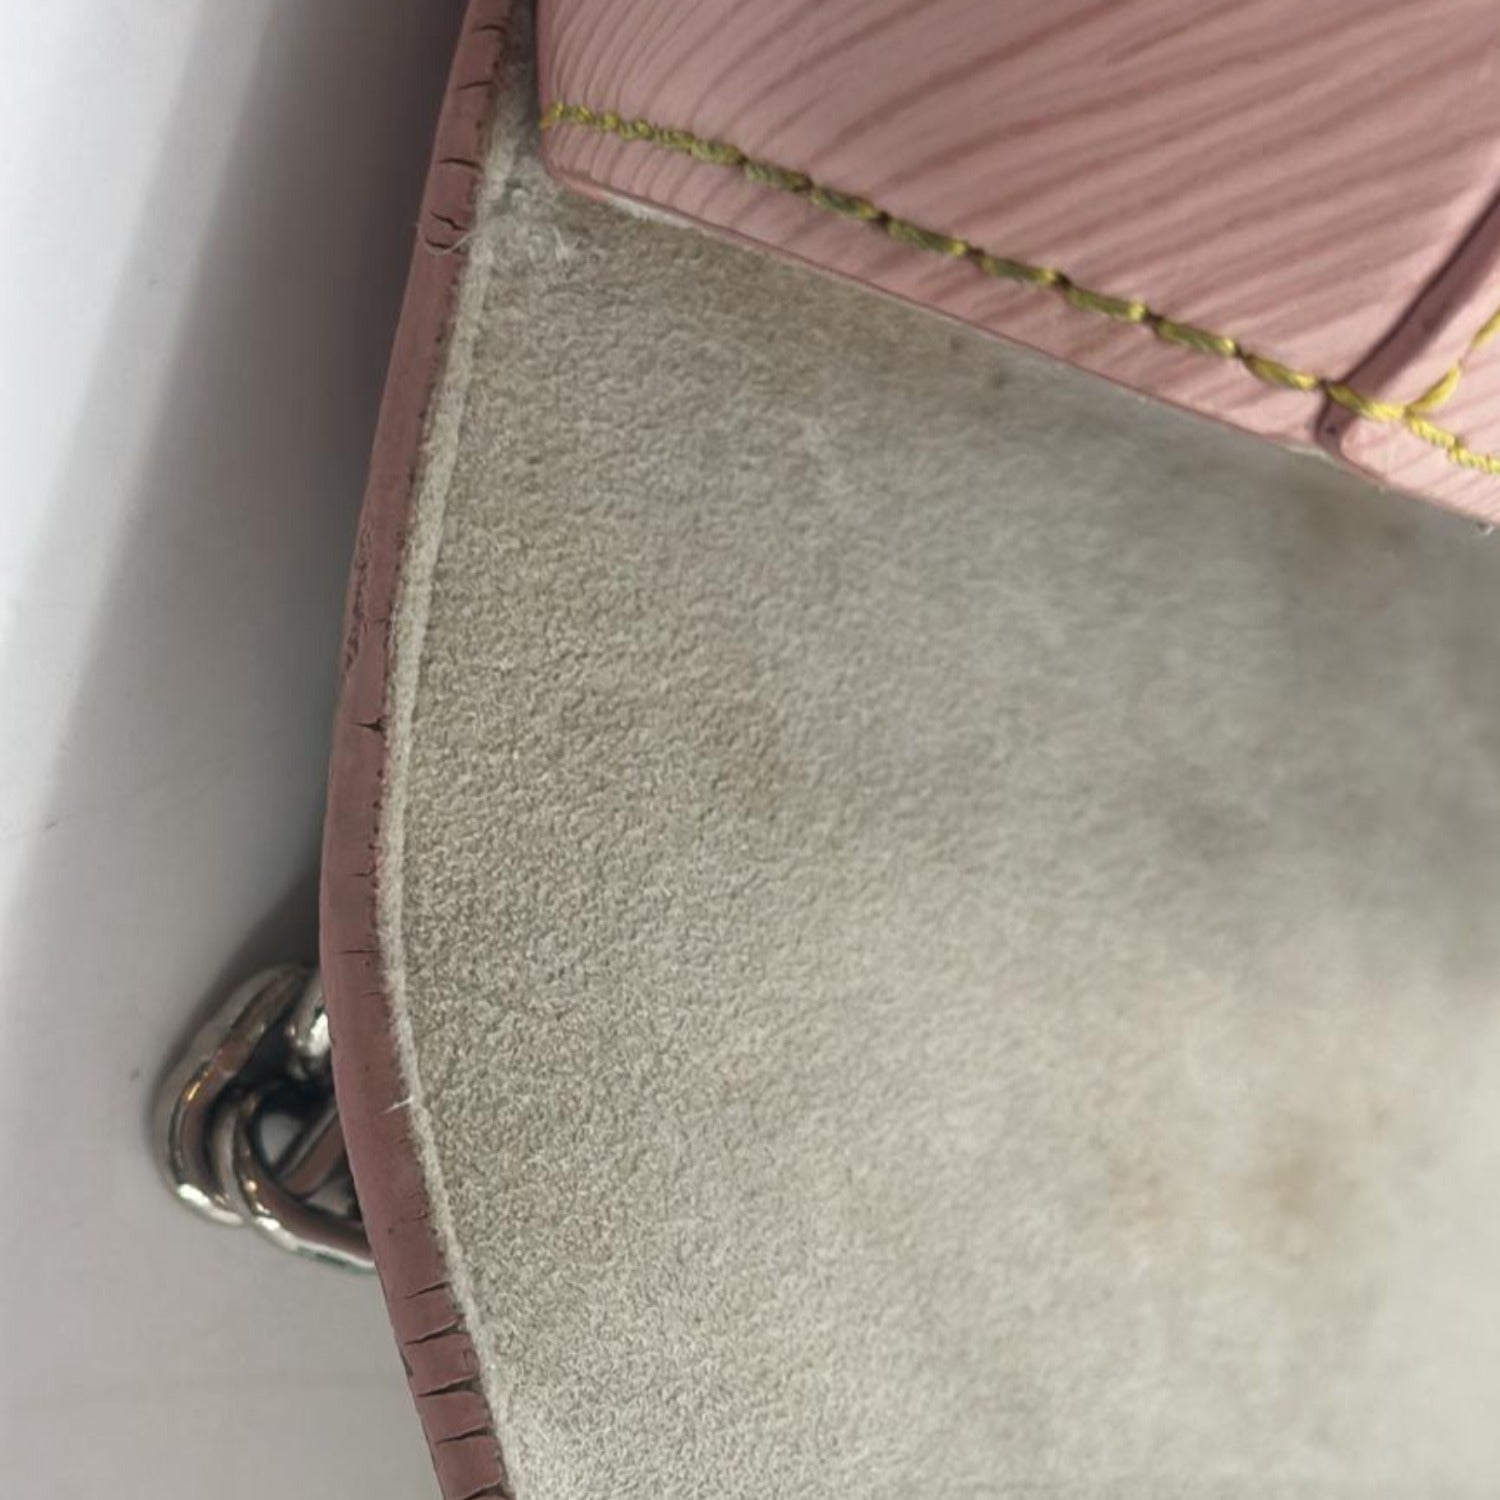 Twist leather crossbody bag Louis Vuitton Pink in Leather - 37224827